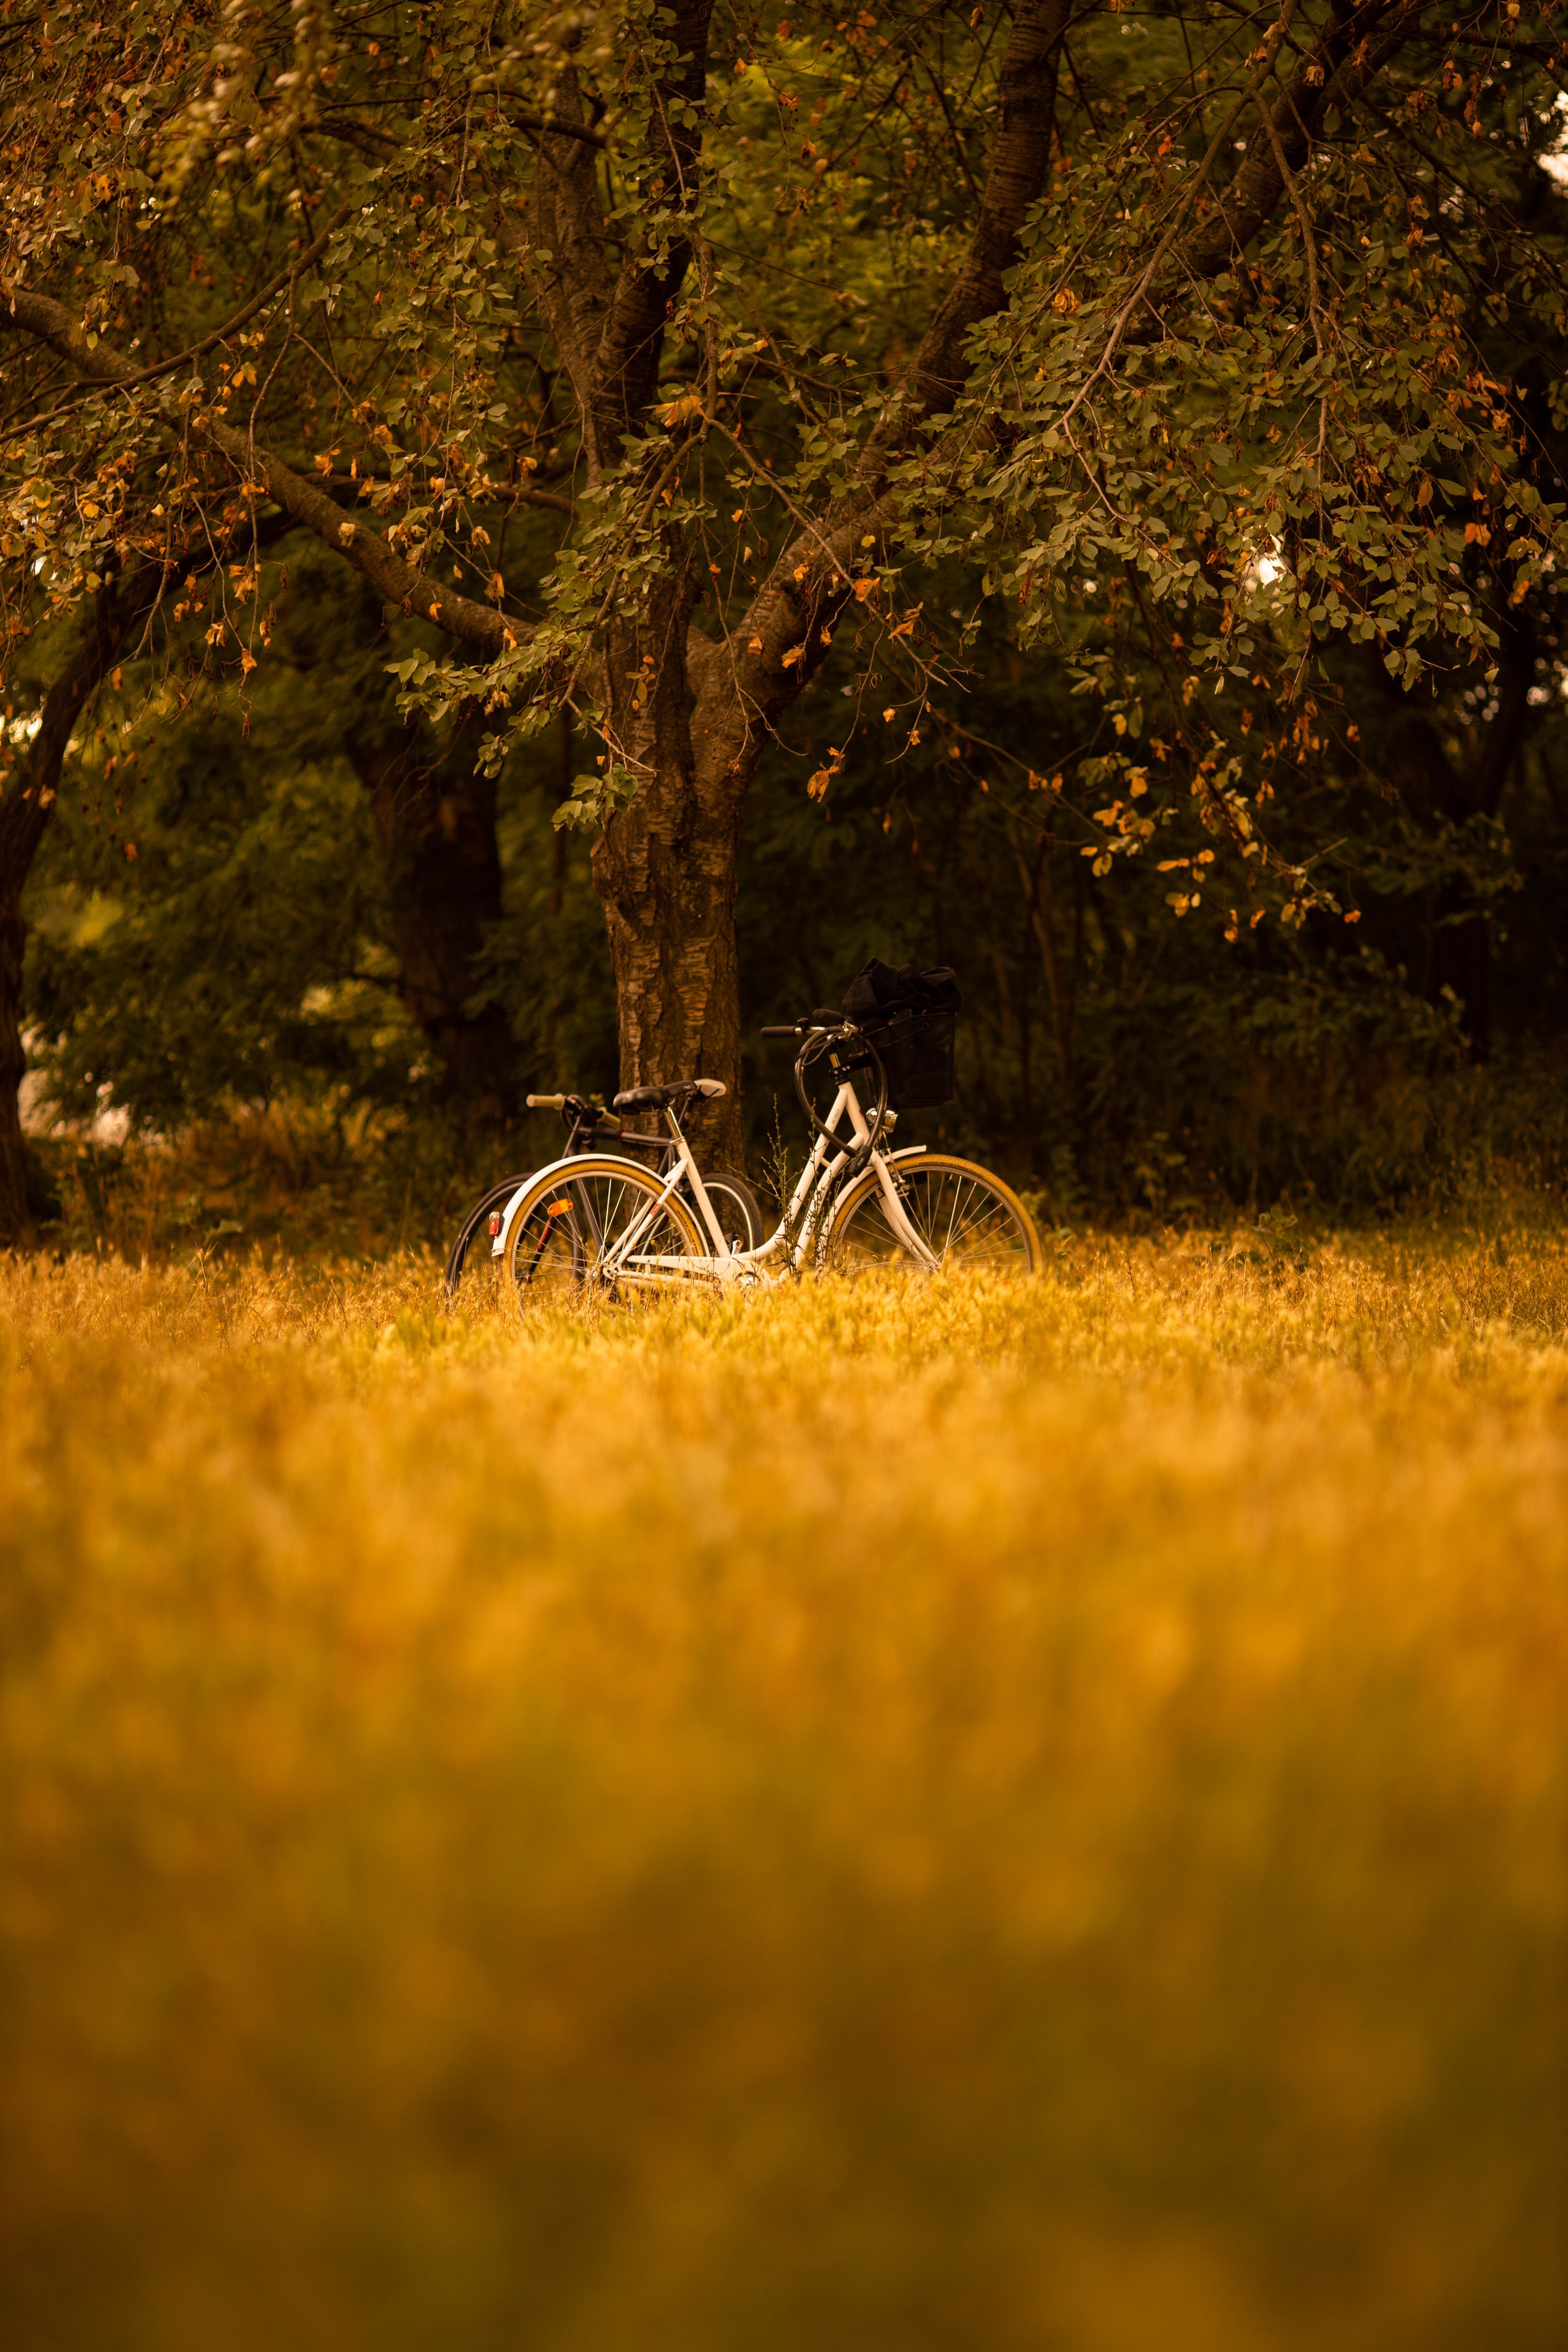 vertical wallpaper transport, miscellanea, trees, miscellaneous, forest, bicycle